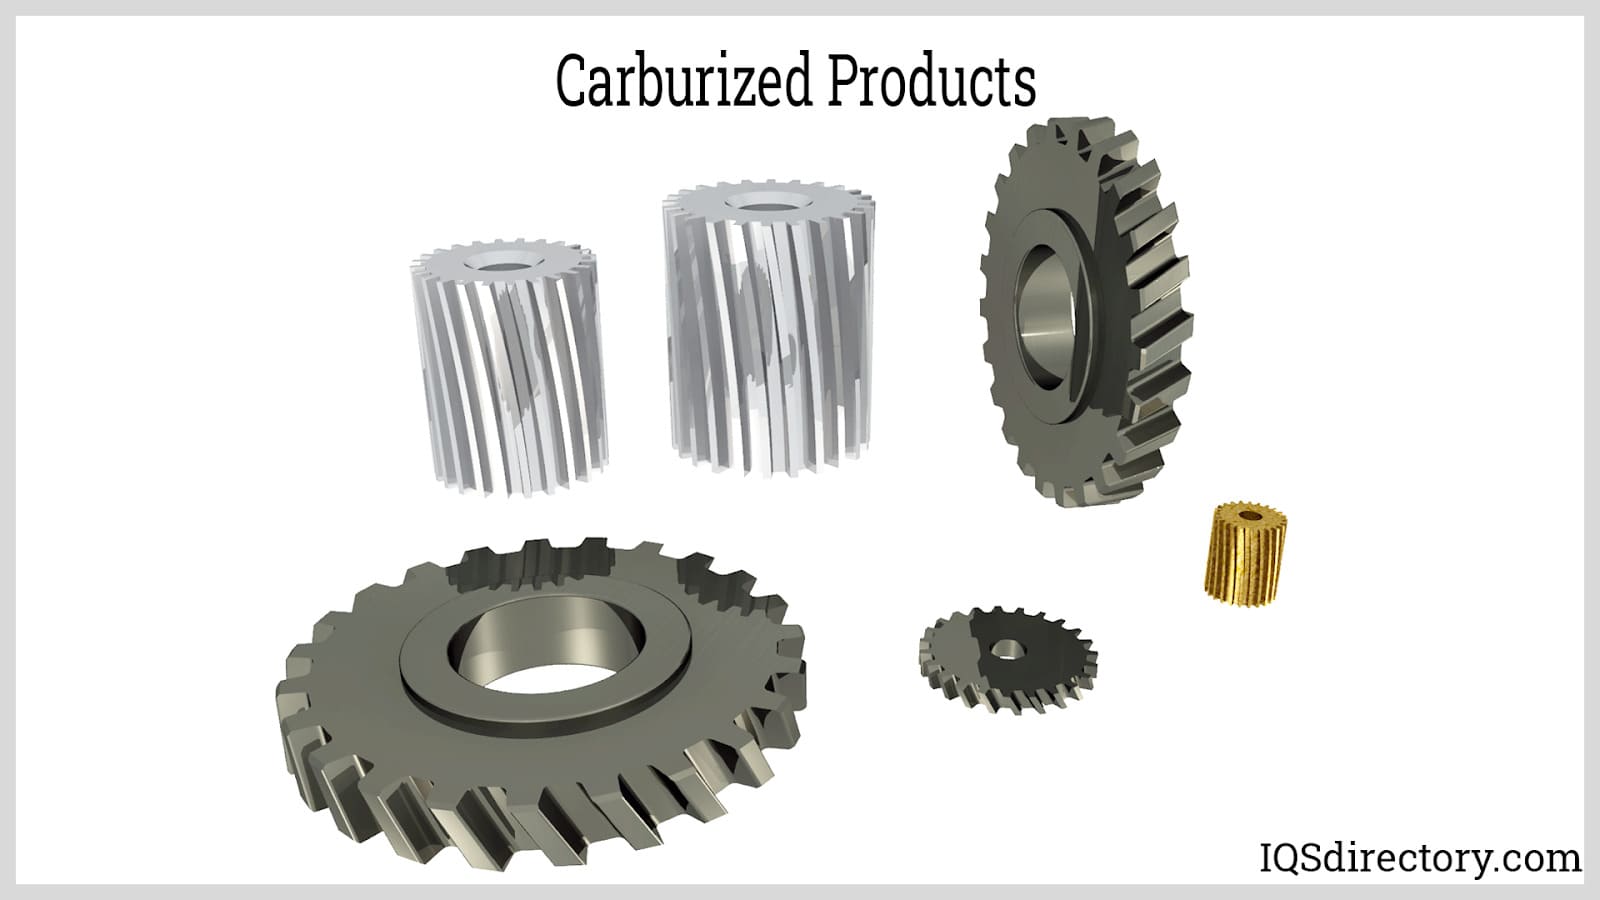 Carburized Products